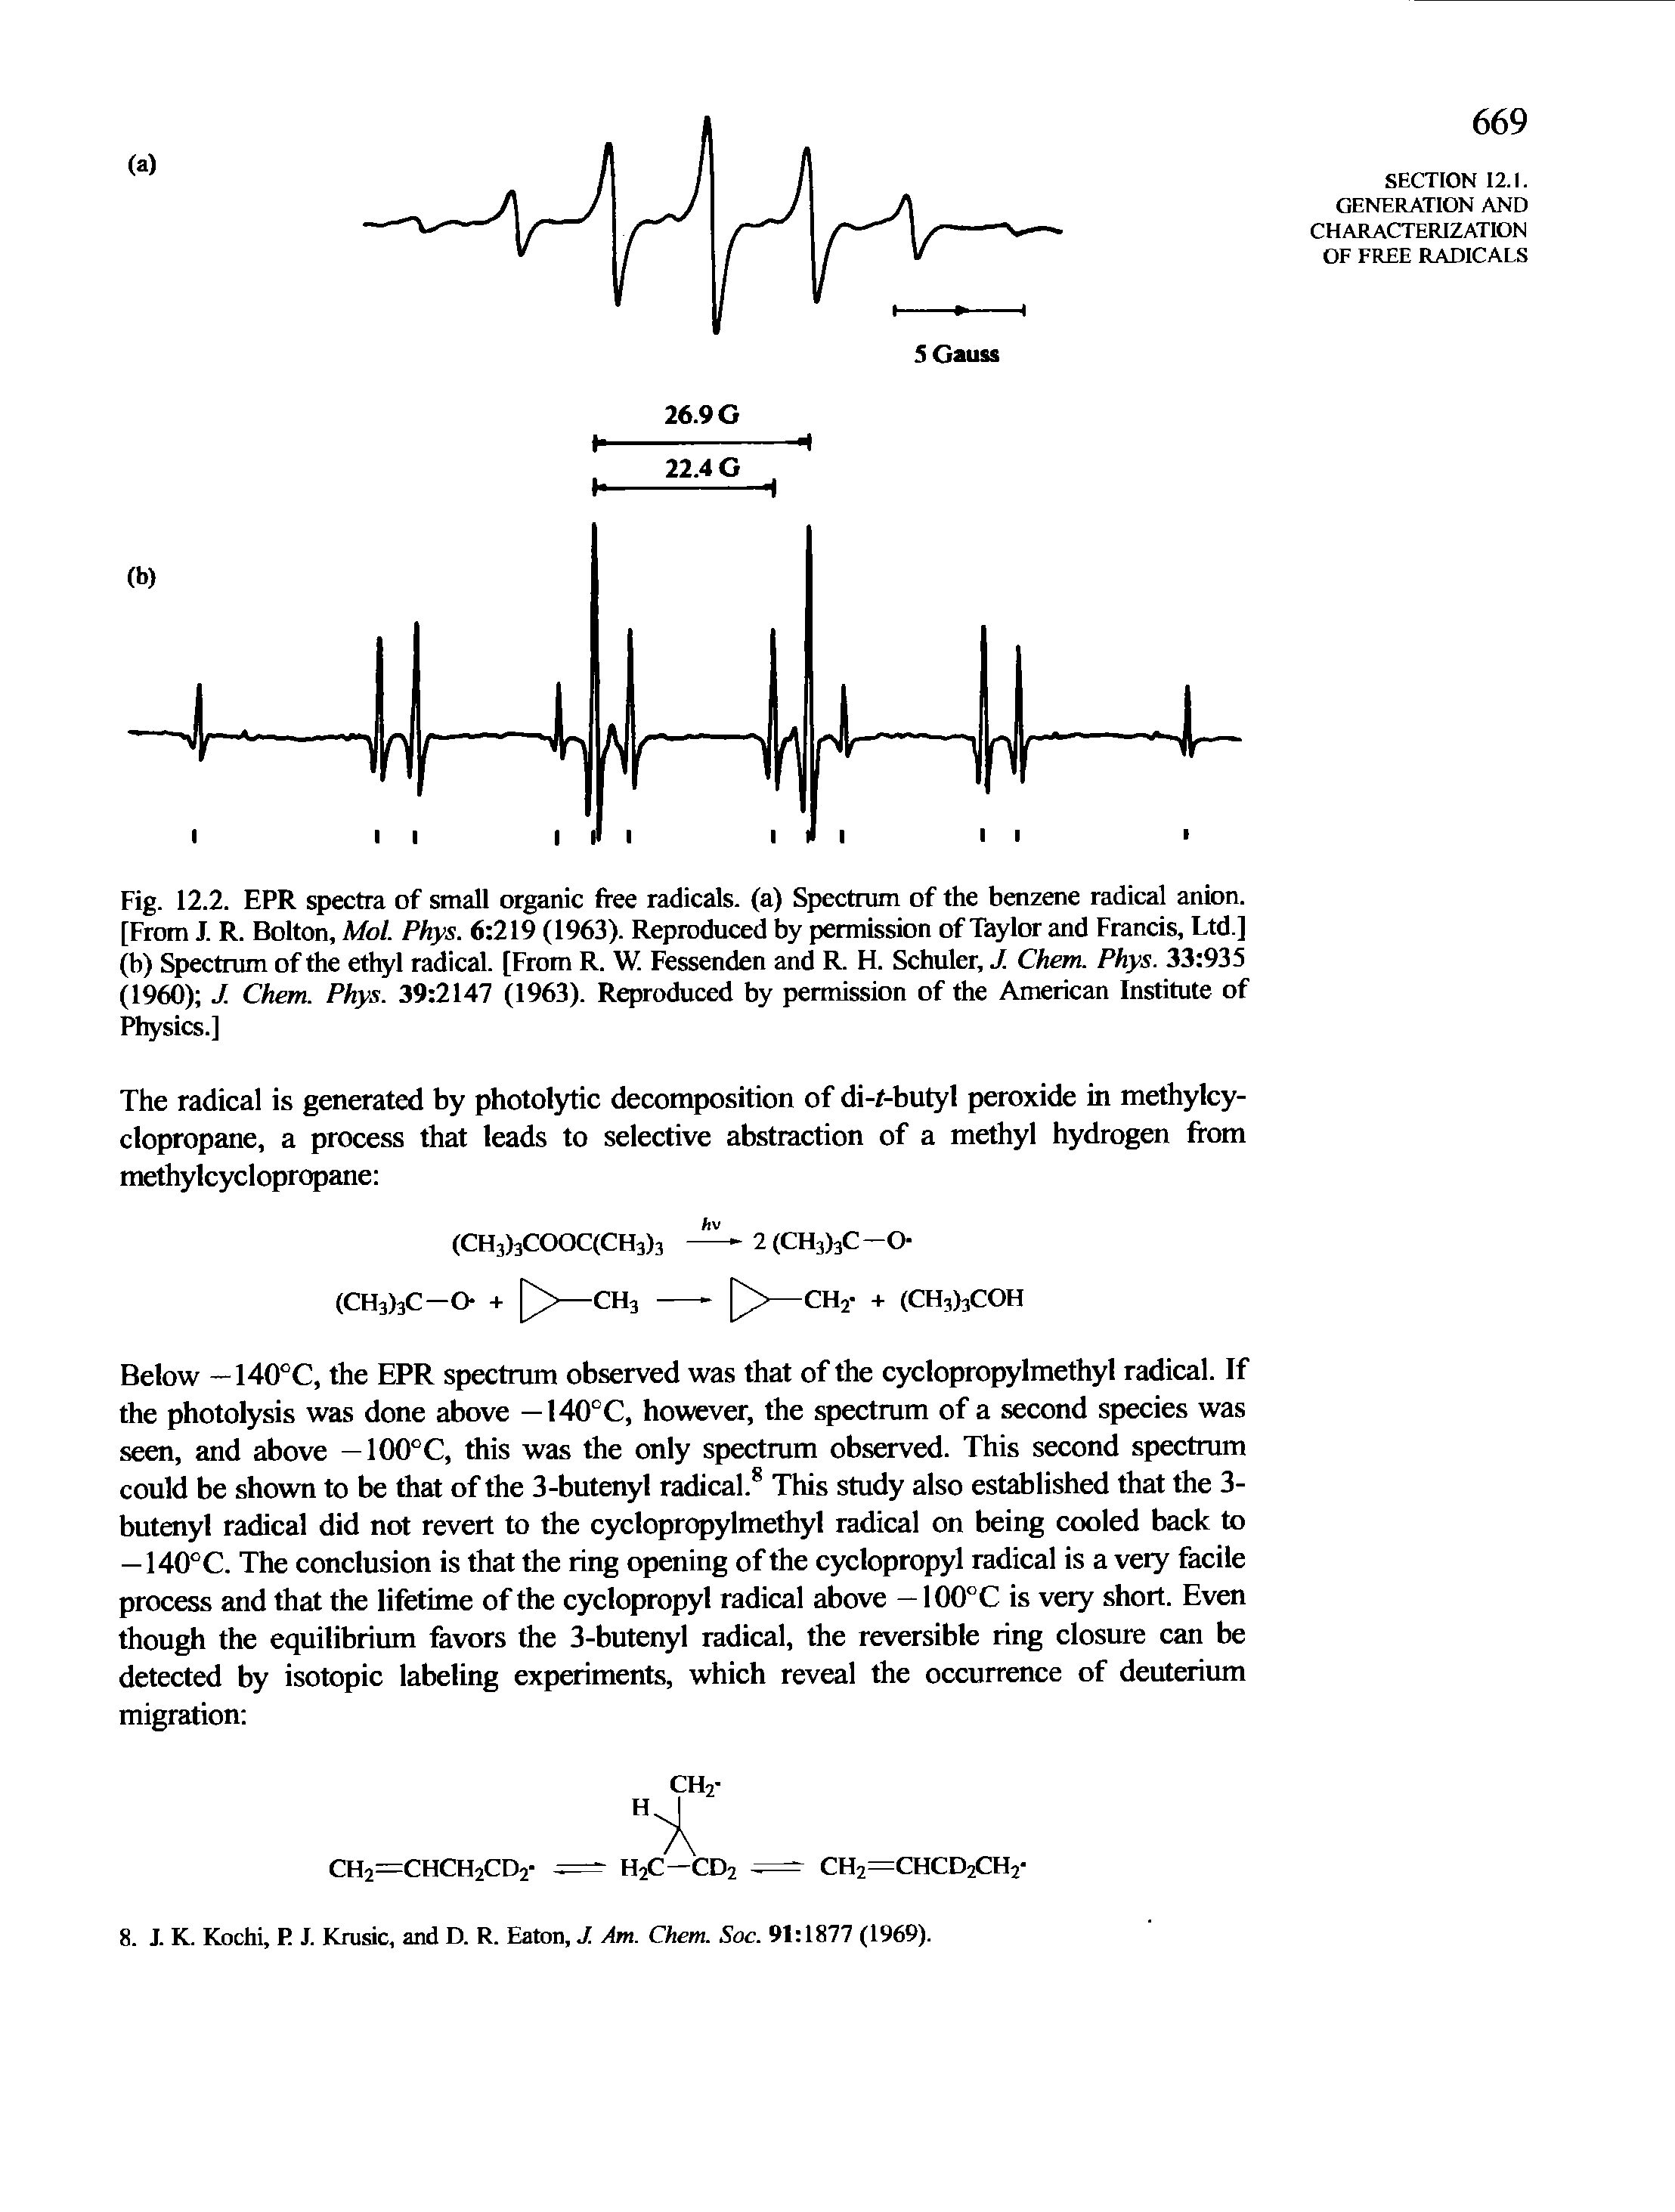 Fig. 12.2. EPR spectra of small organic free radicals, (a) Spectrum of the benzene radical anion. [From J. R. Bolton, Mol. Phys. 6 219 (1963). Reproduced by permission of Taylor and Francis, Ltd.] (b) Spectrum of the ethyl radical. [From R. W. Fessenden and R. H. Schuler, J. Chem. Phys. 33 935 (1960) J. Chem. Phys. 39 2147 (1963). Reproduced by permission of the American Institute of Physics.]...